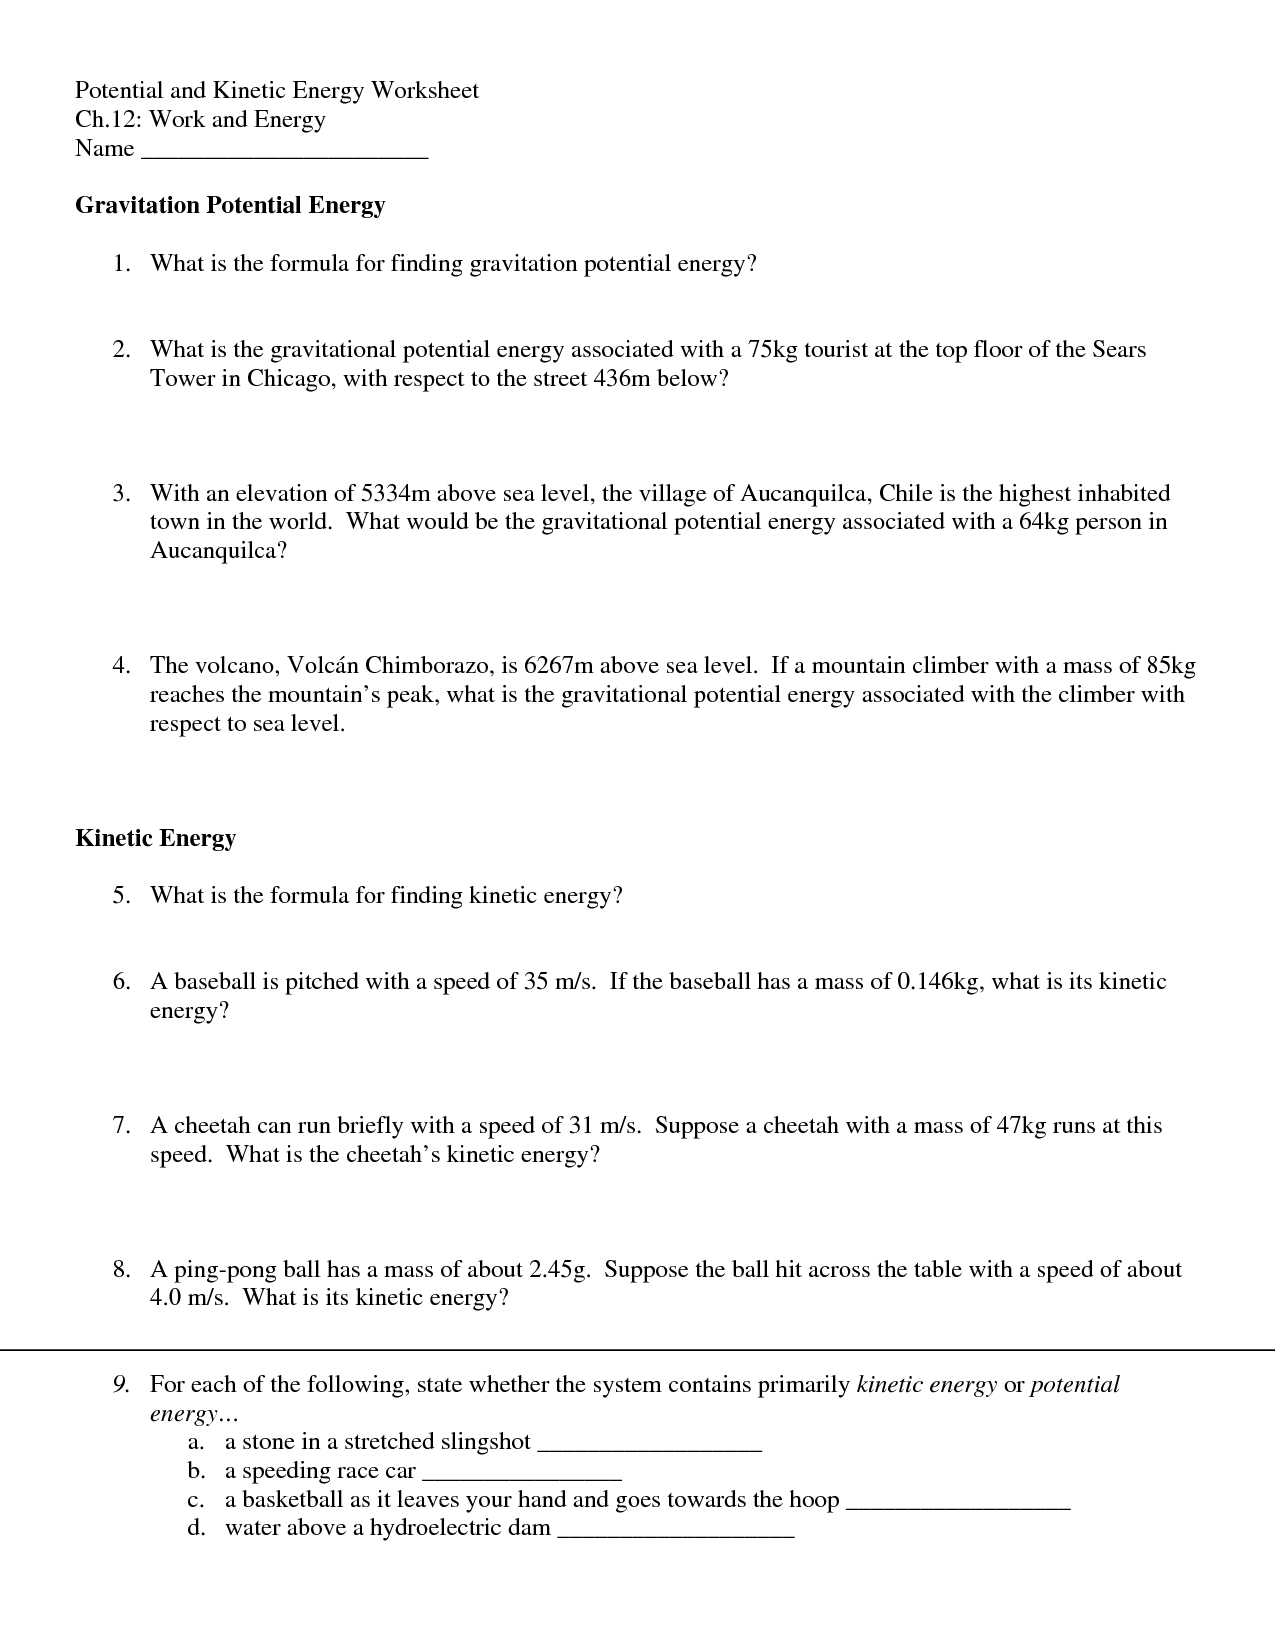 11 Best Images of Potential And Kinetic Energy Worksheets  Potential and Kinetic Energy 